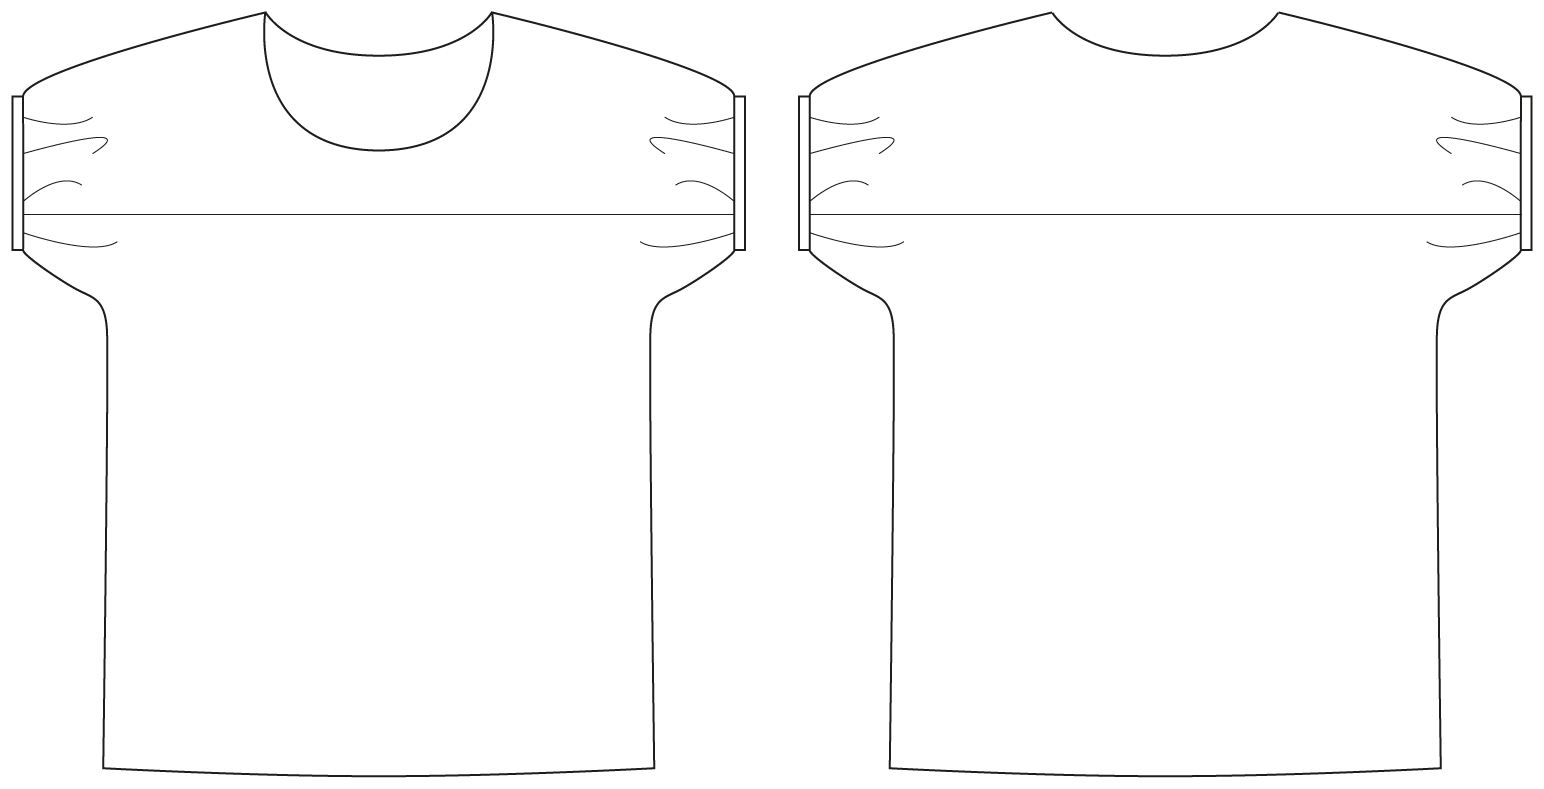 Schnittquelle Schnittmuster Shop - Schnittmuster Shirt Ners- www With Regard To Blank Tshirt Template Pdf